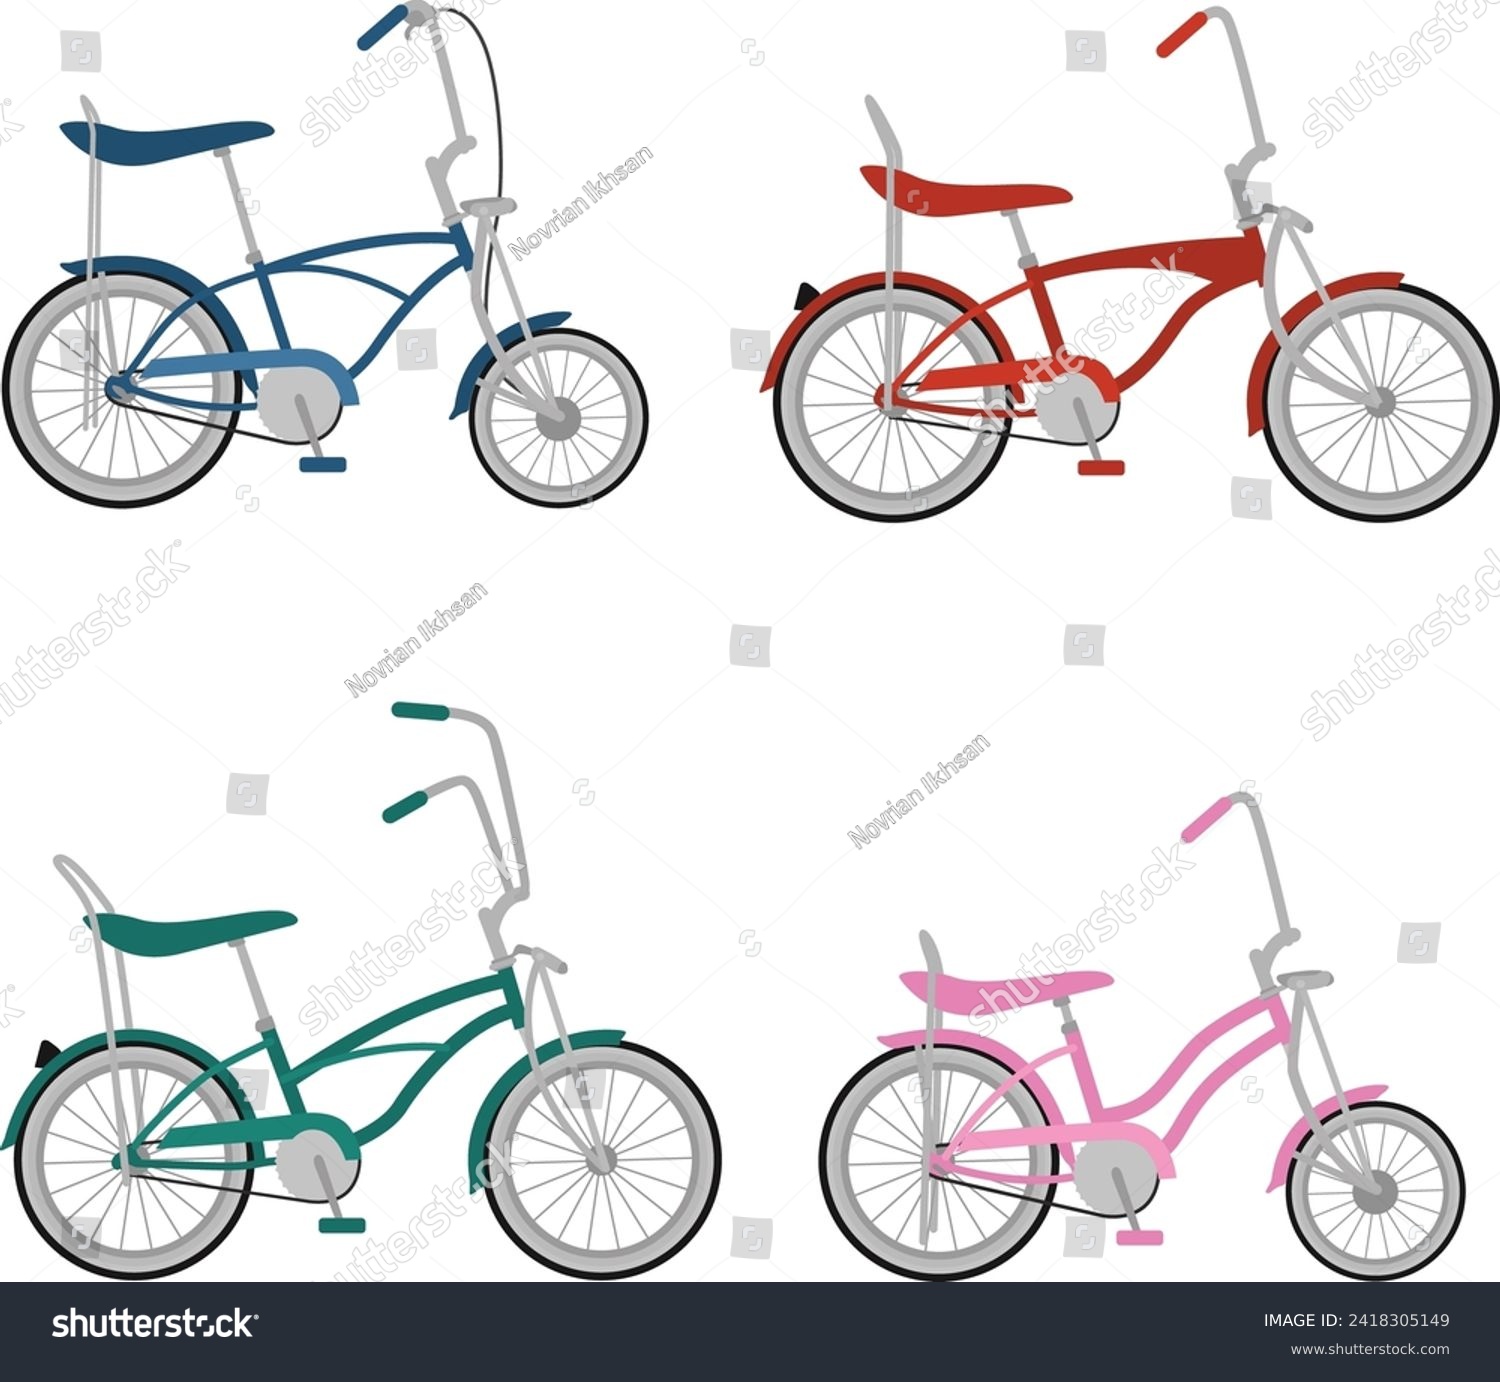 SVG of vintage bicycles vector. lowrider bicycles. svg